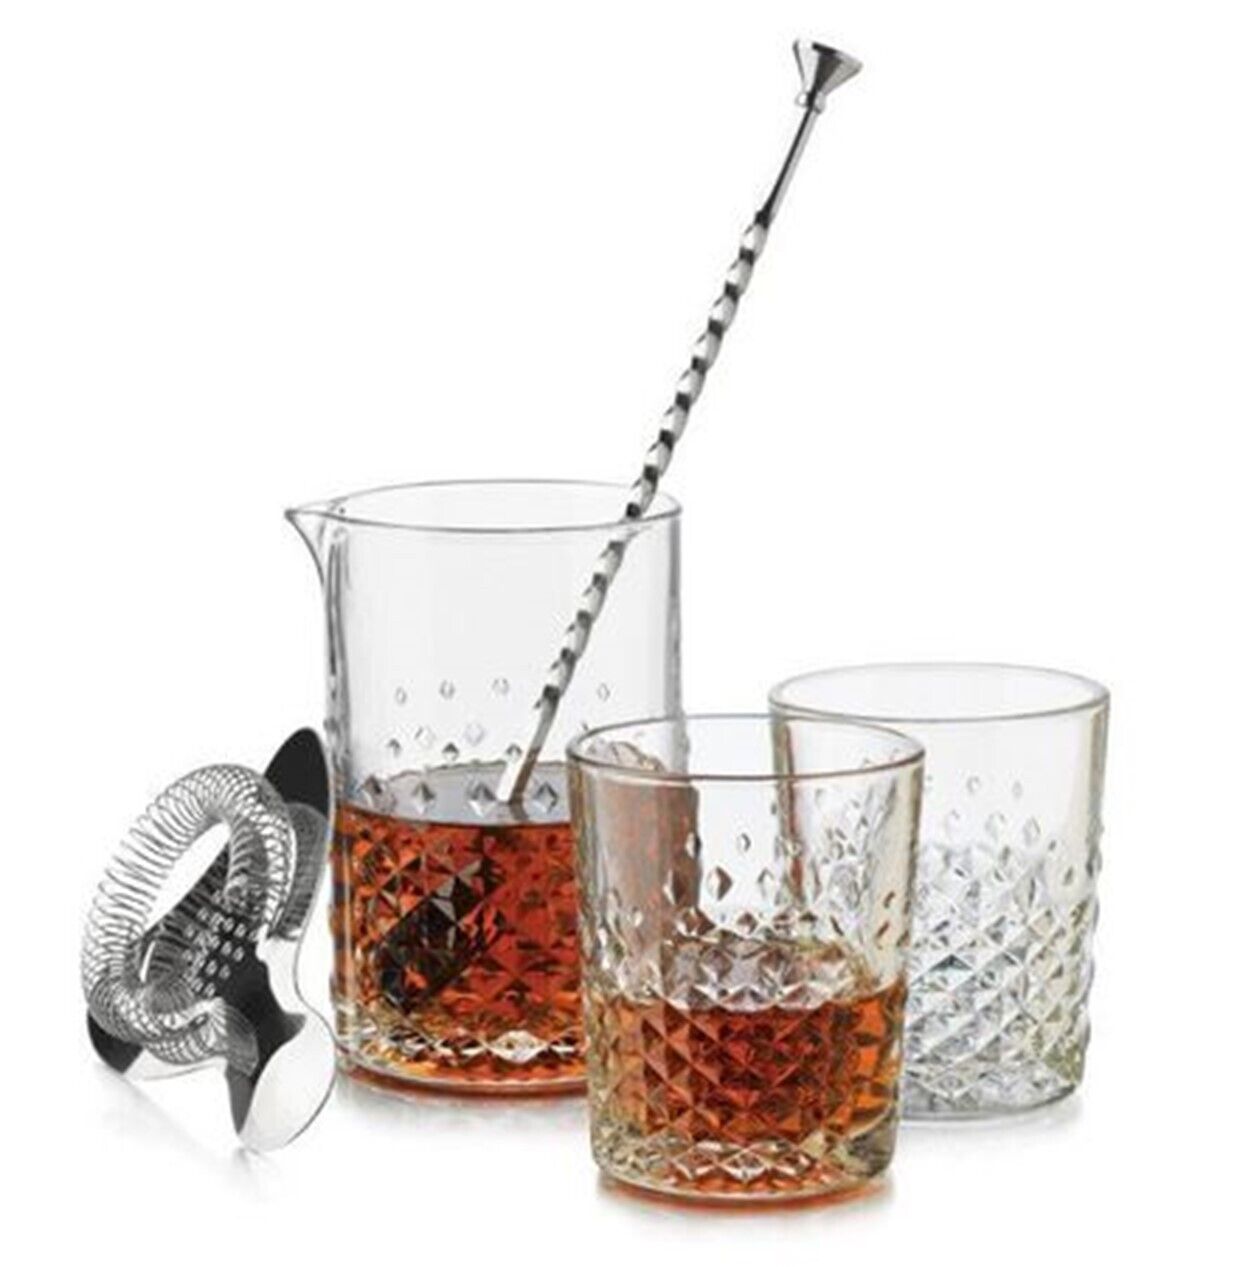 LIBBEY 5-PC VINTAGE MODERN BAR SET INCLUDES 12 OZ DOUBLE OLD-FASHIONED GLASSES